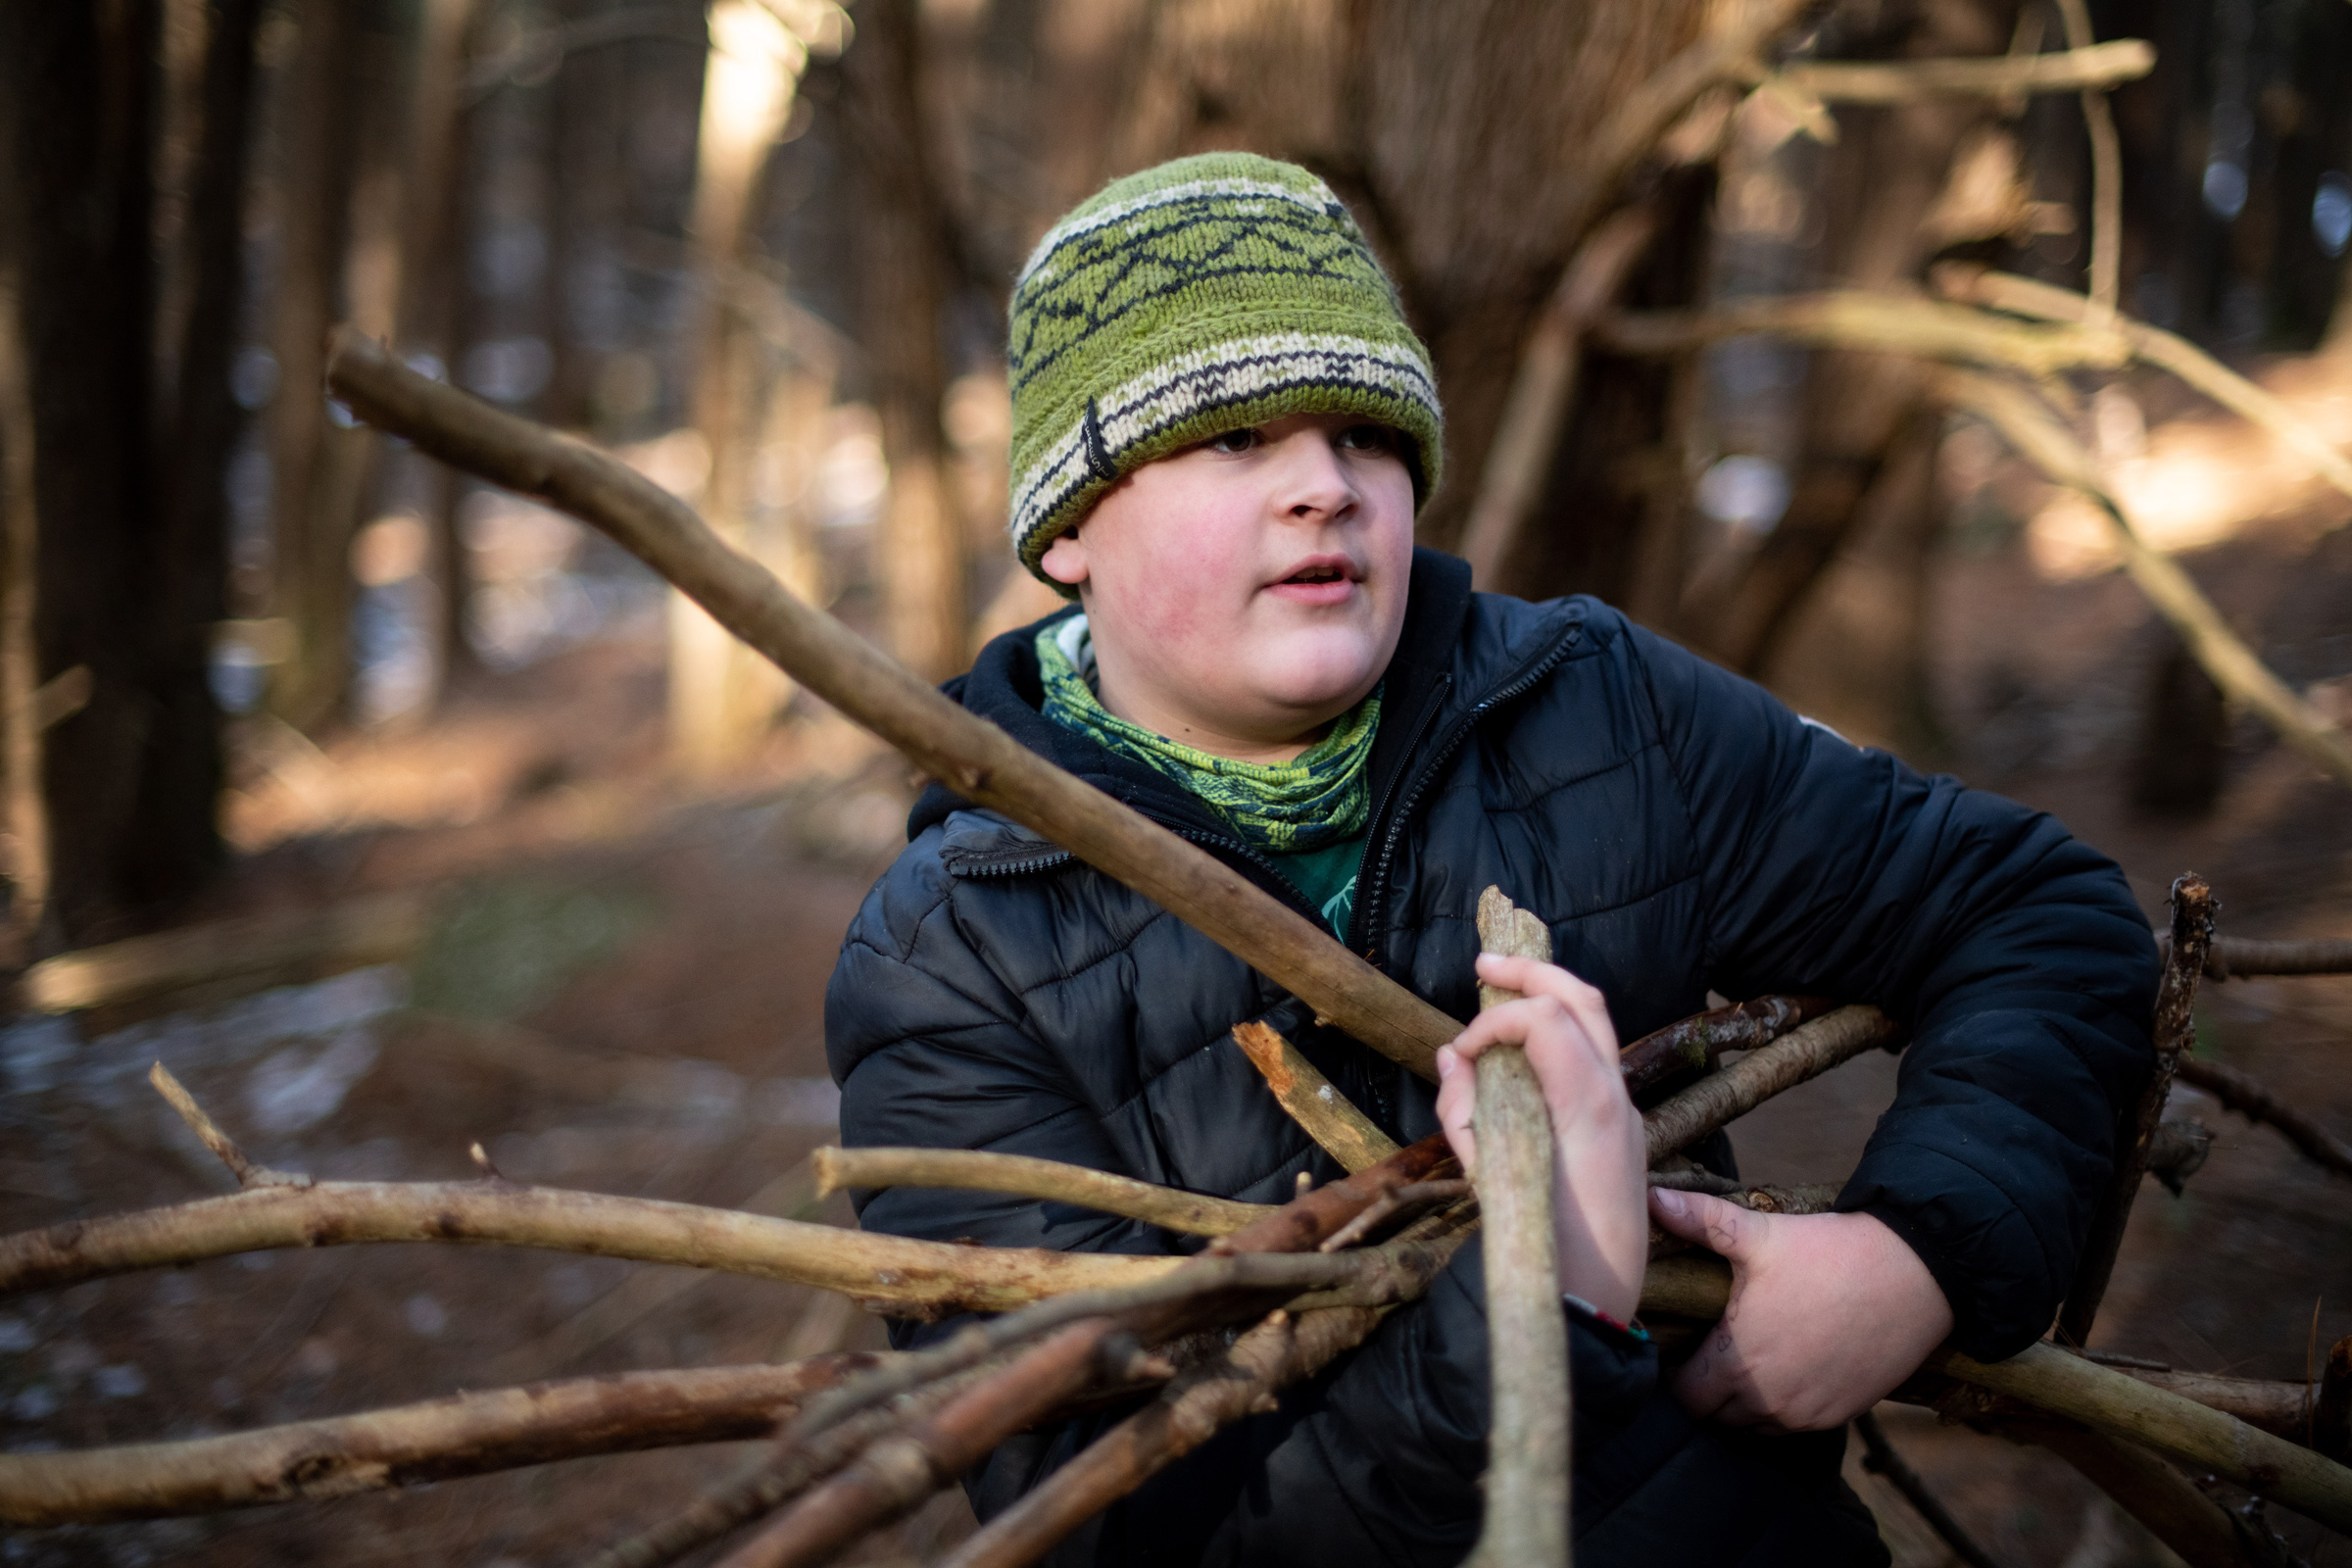 A middle school boy collects sticks to build a shelter. (photo © Ben Conant)